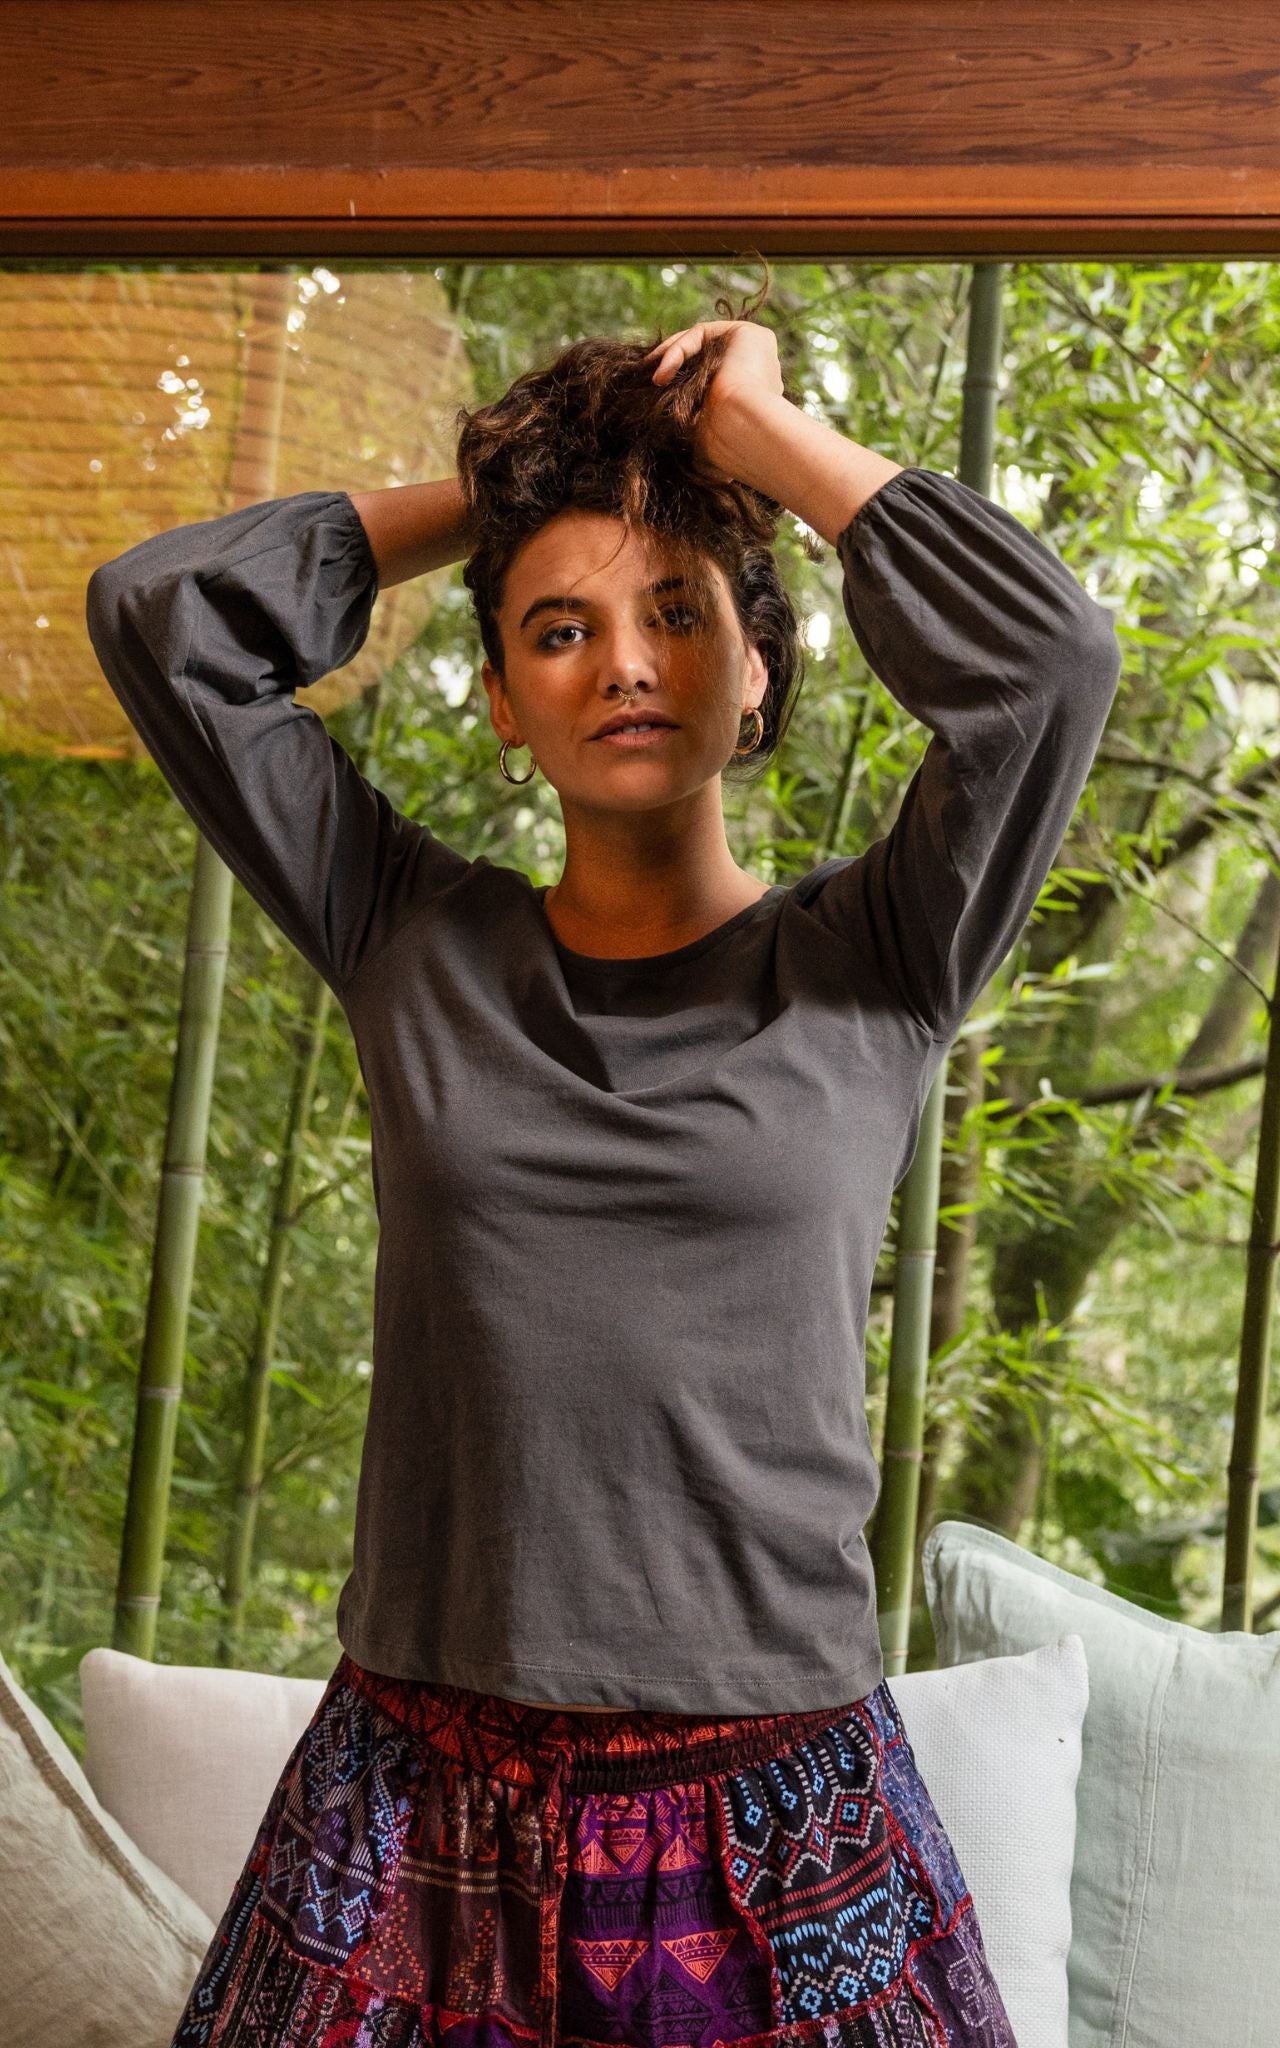 Surya The Label Ethical Organic Cotton 'Zoé' Top made in Nepal - Dusty Grey